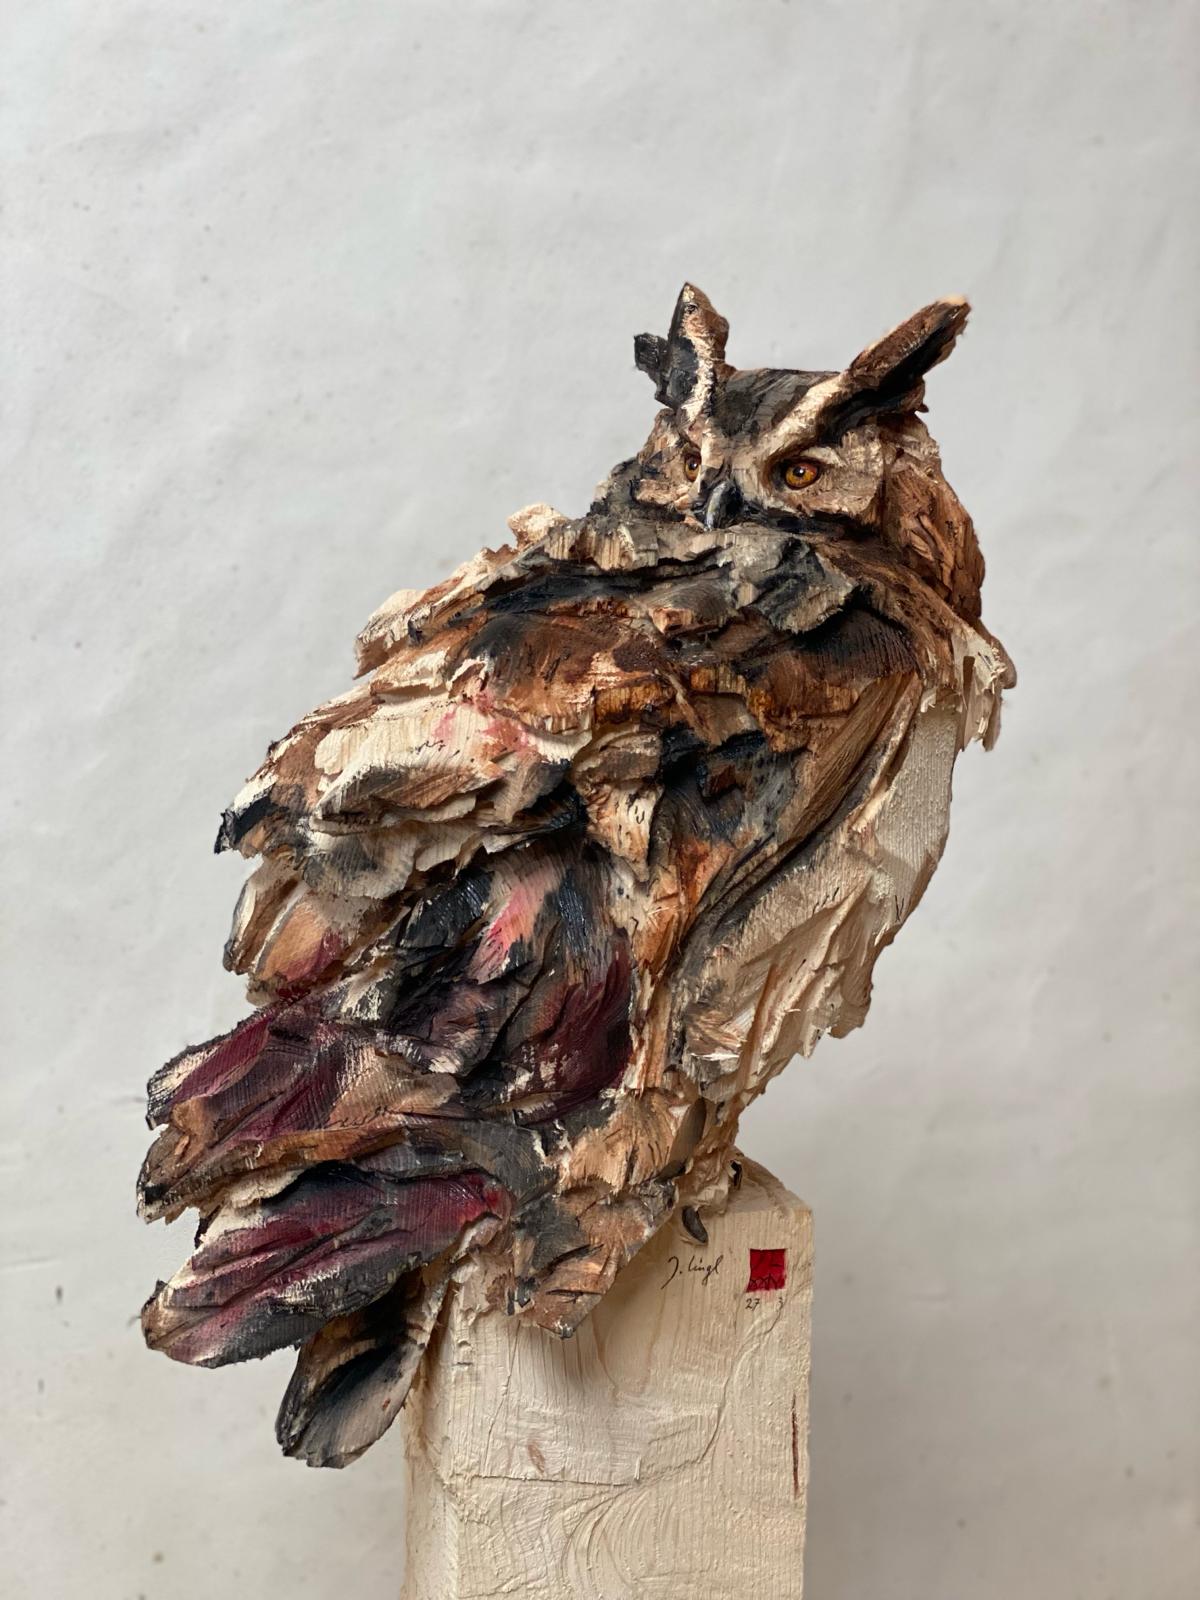 Jürgen Lingl Hand Carves Precise And Textured Figurative Sculptures From Wood (12)